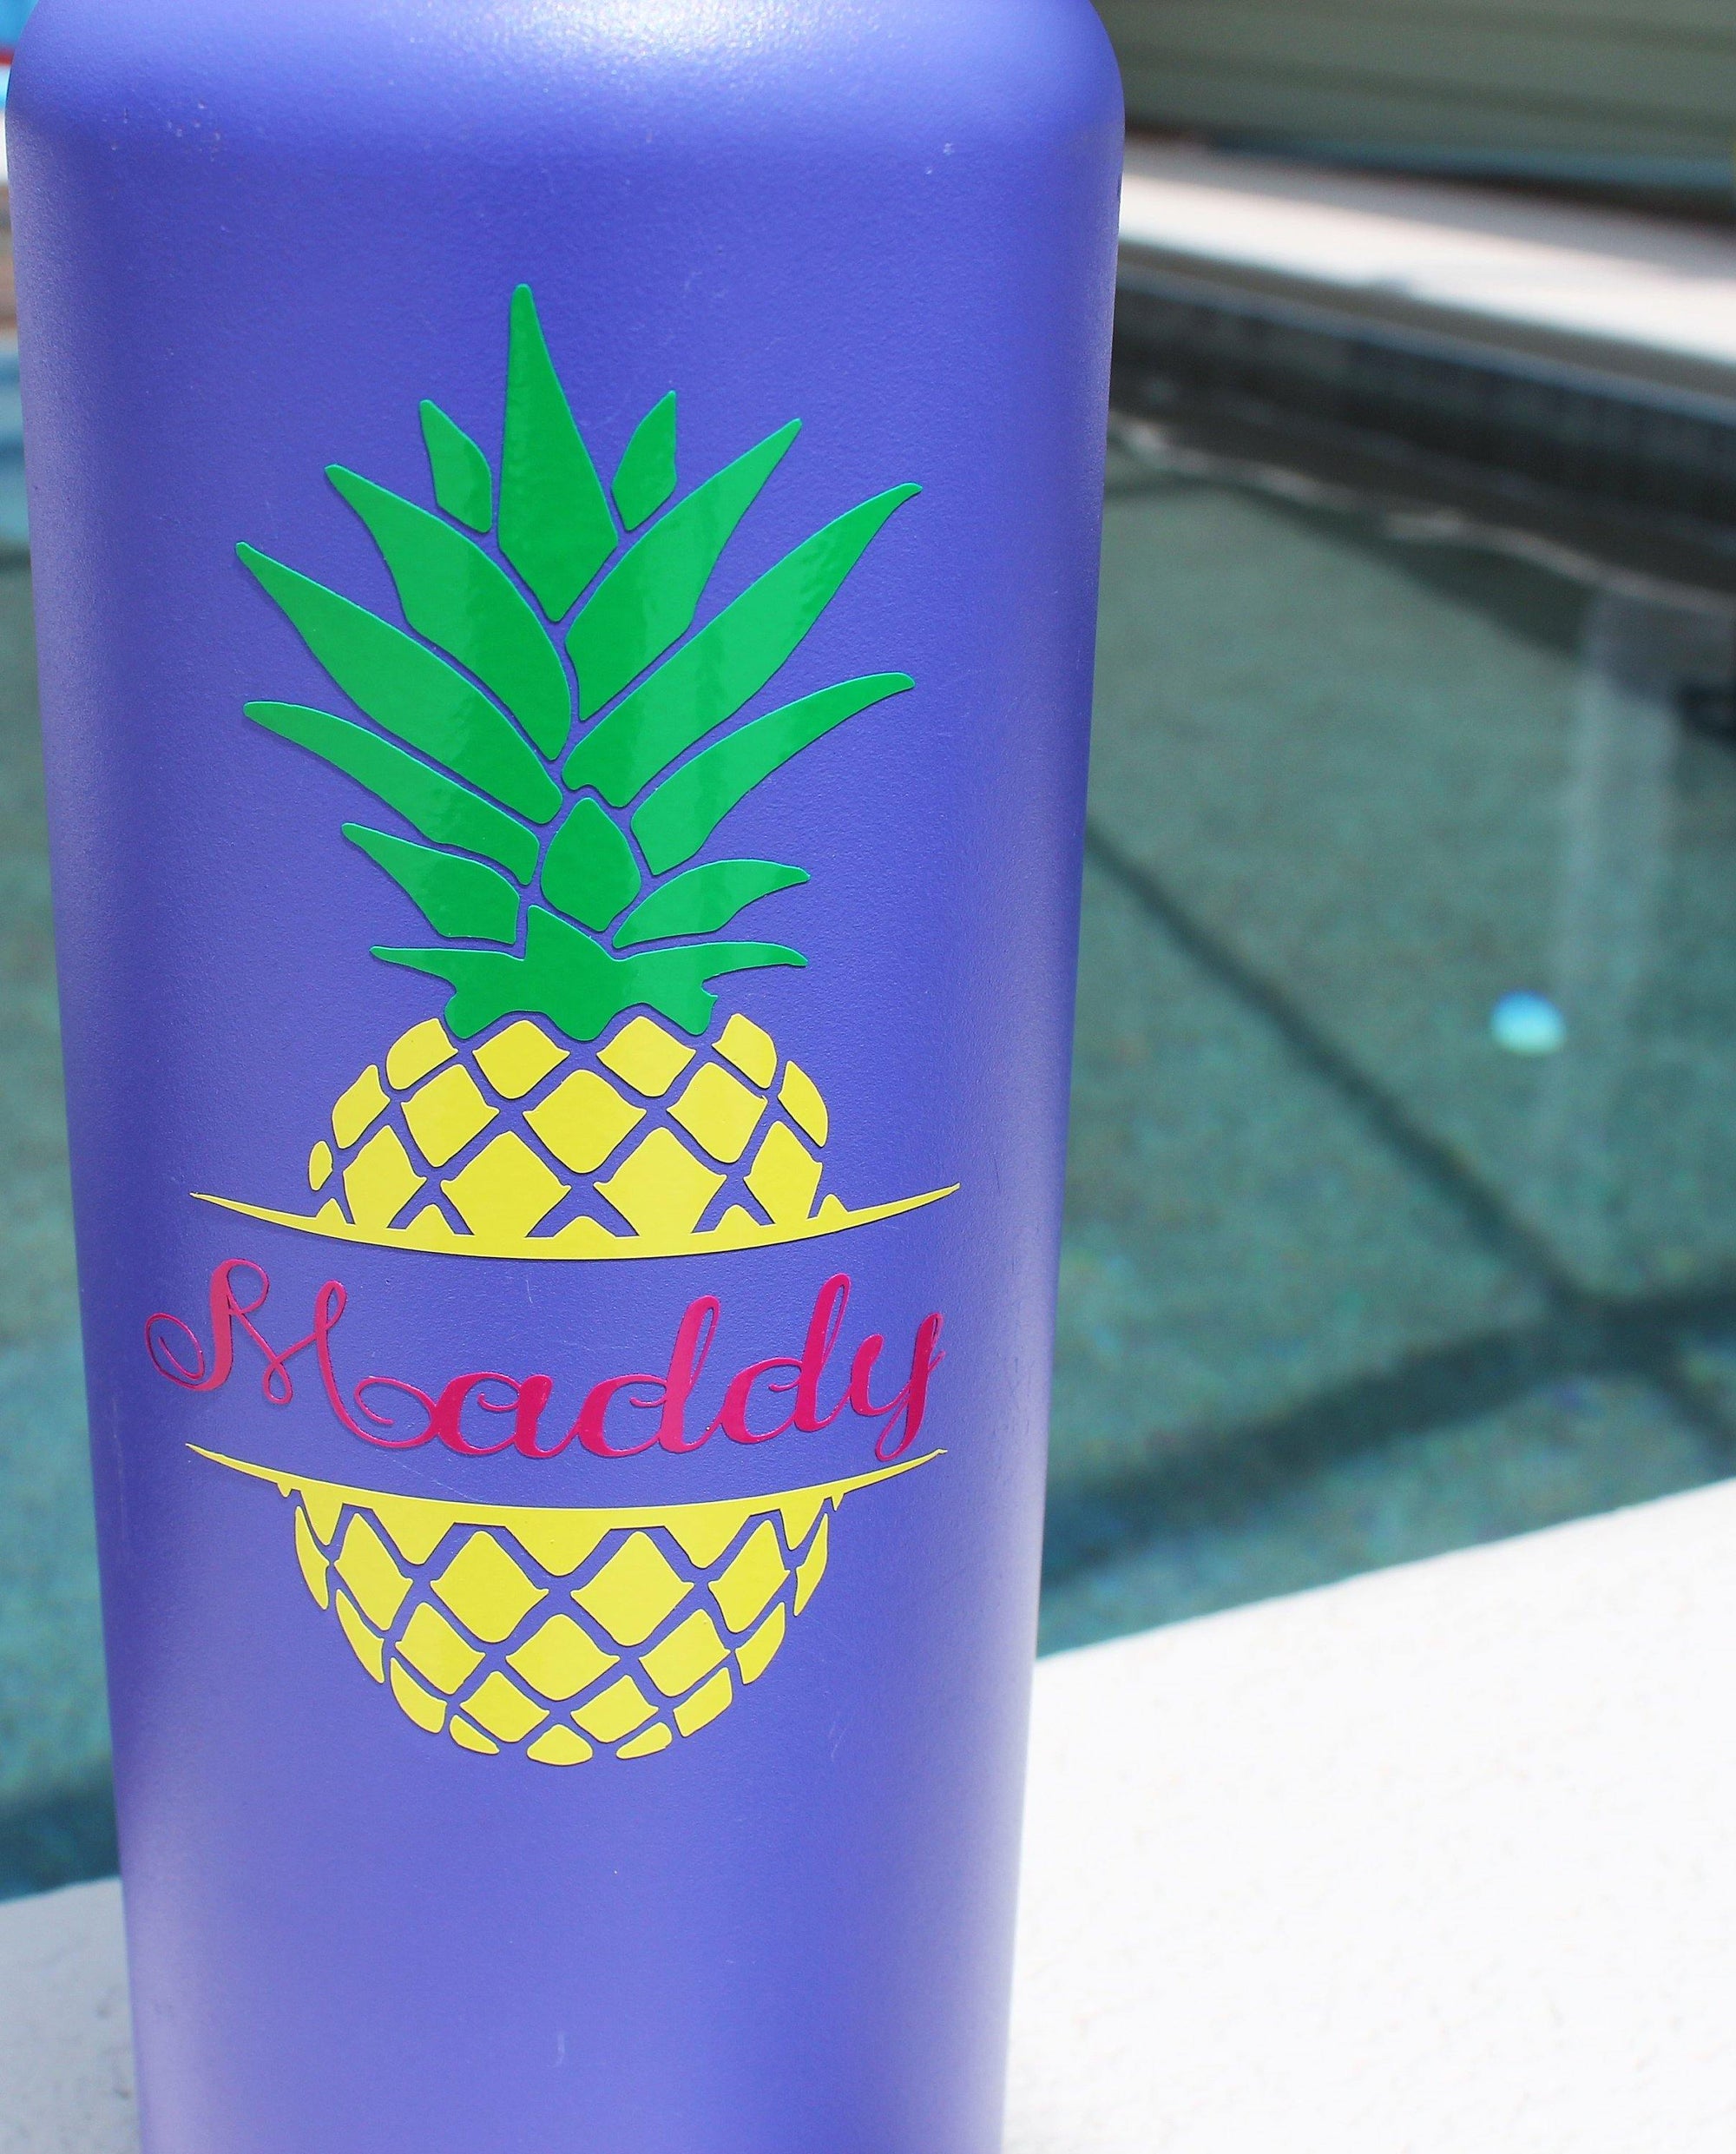 Door Decal | Personalized Vinyl Decal | Monogram Vinyl Decal | Custom Decal | Pineapple - This & That Solutions - Door Decal | Personalized Vinyl Decal | Monogram Vinyl Decal | Custom Decal | Pineapple - Personalized Gifts & Custom Home Decor